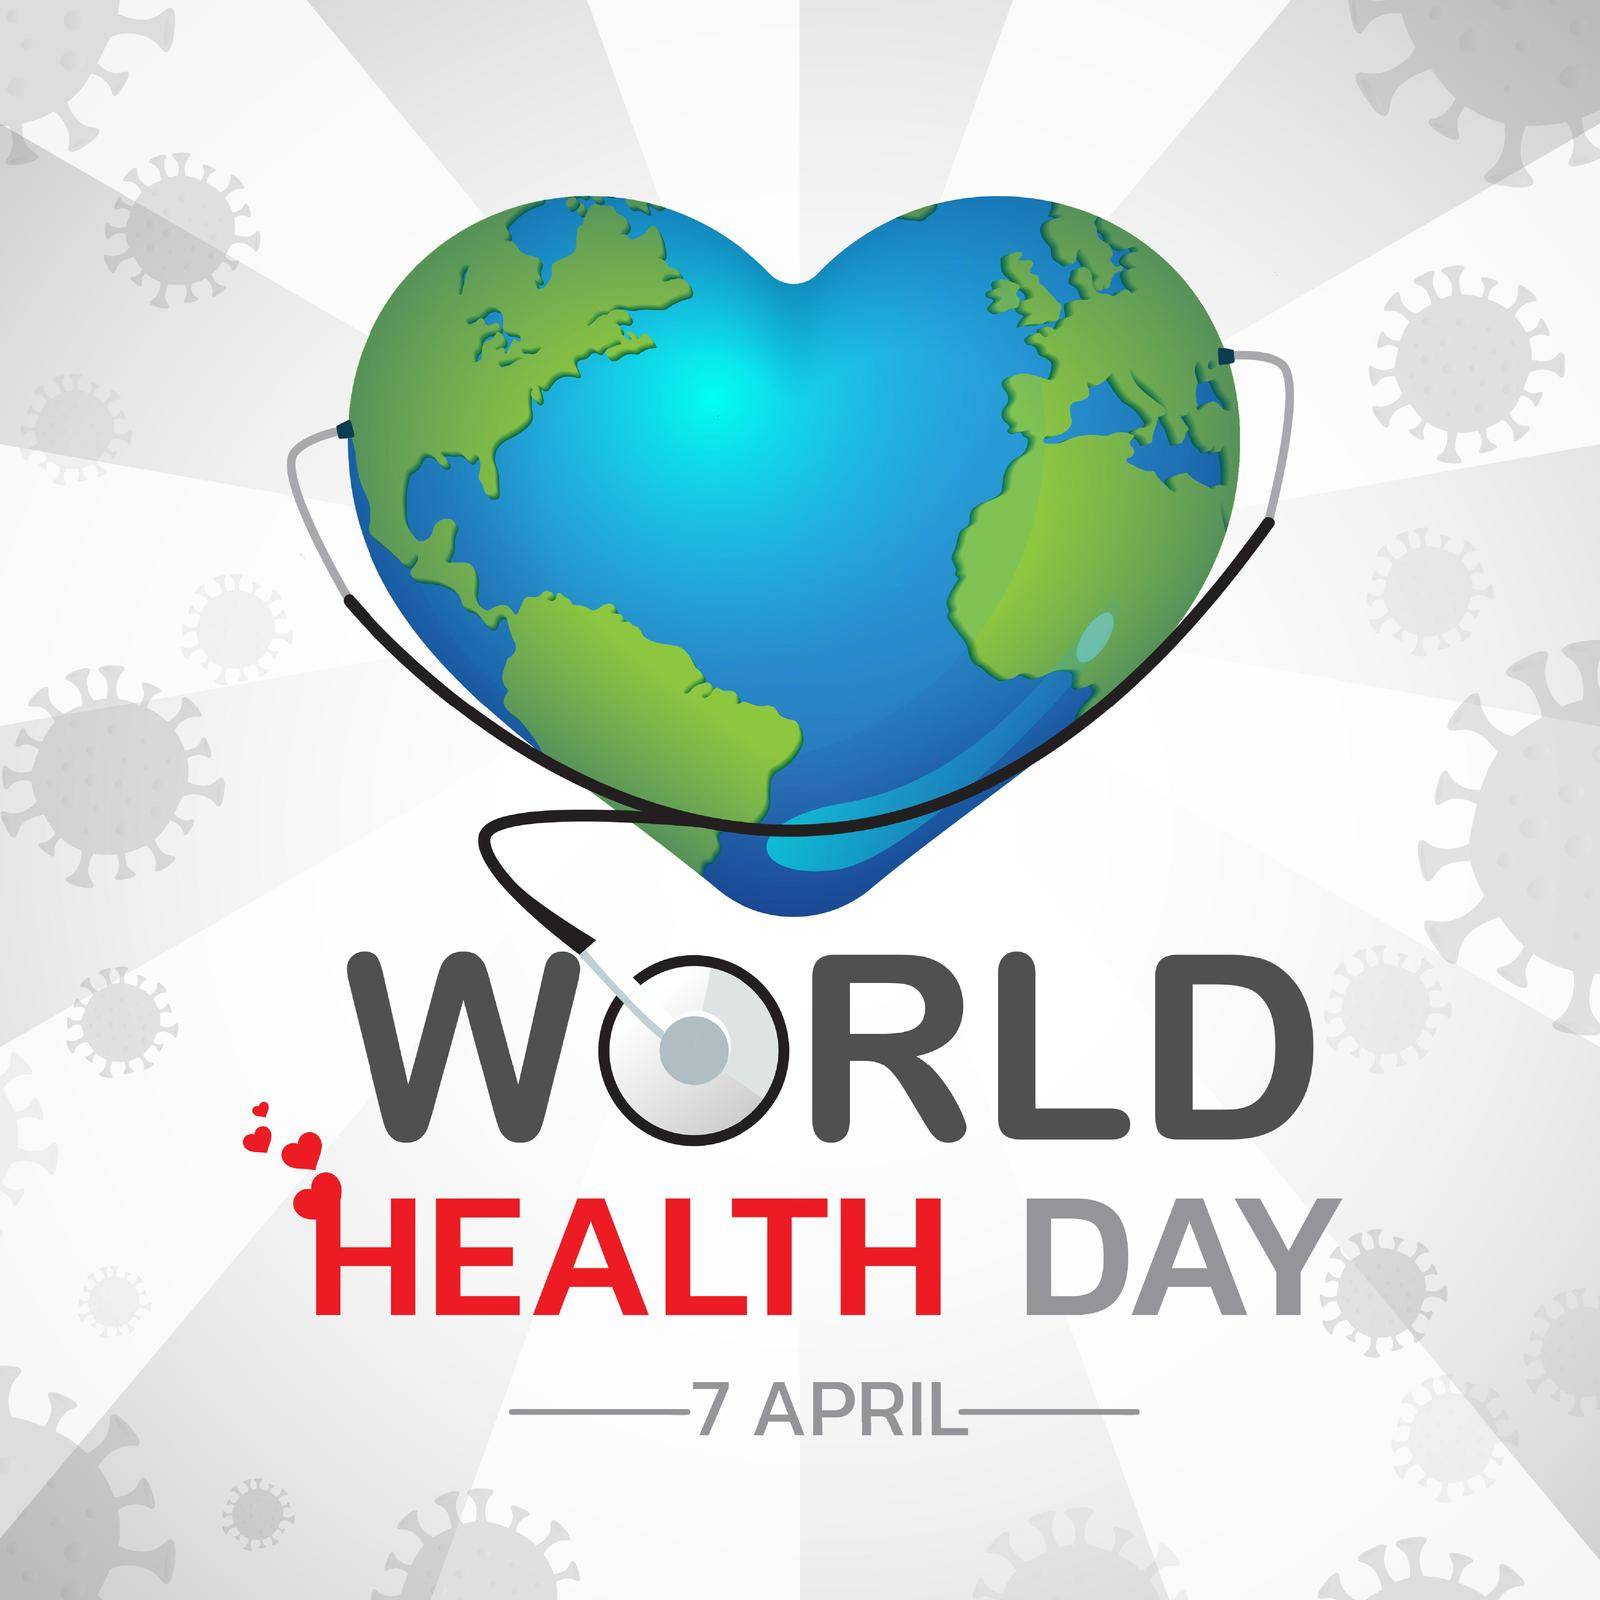 World Health Day by chuttee